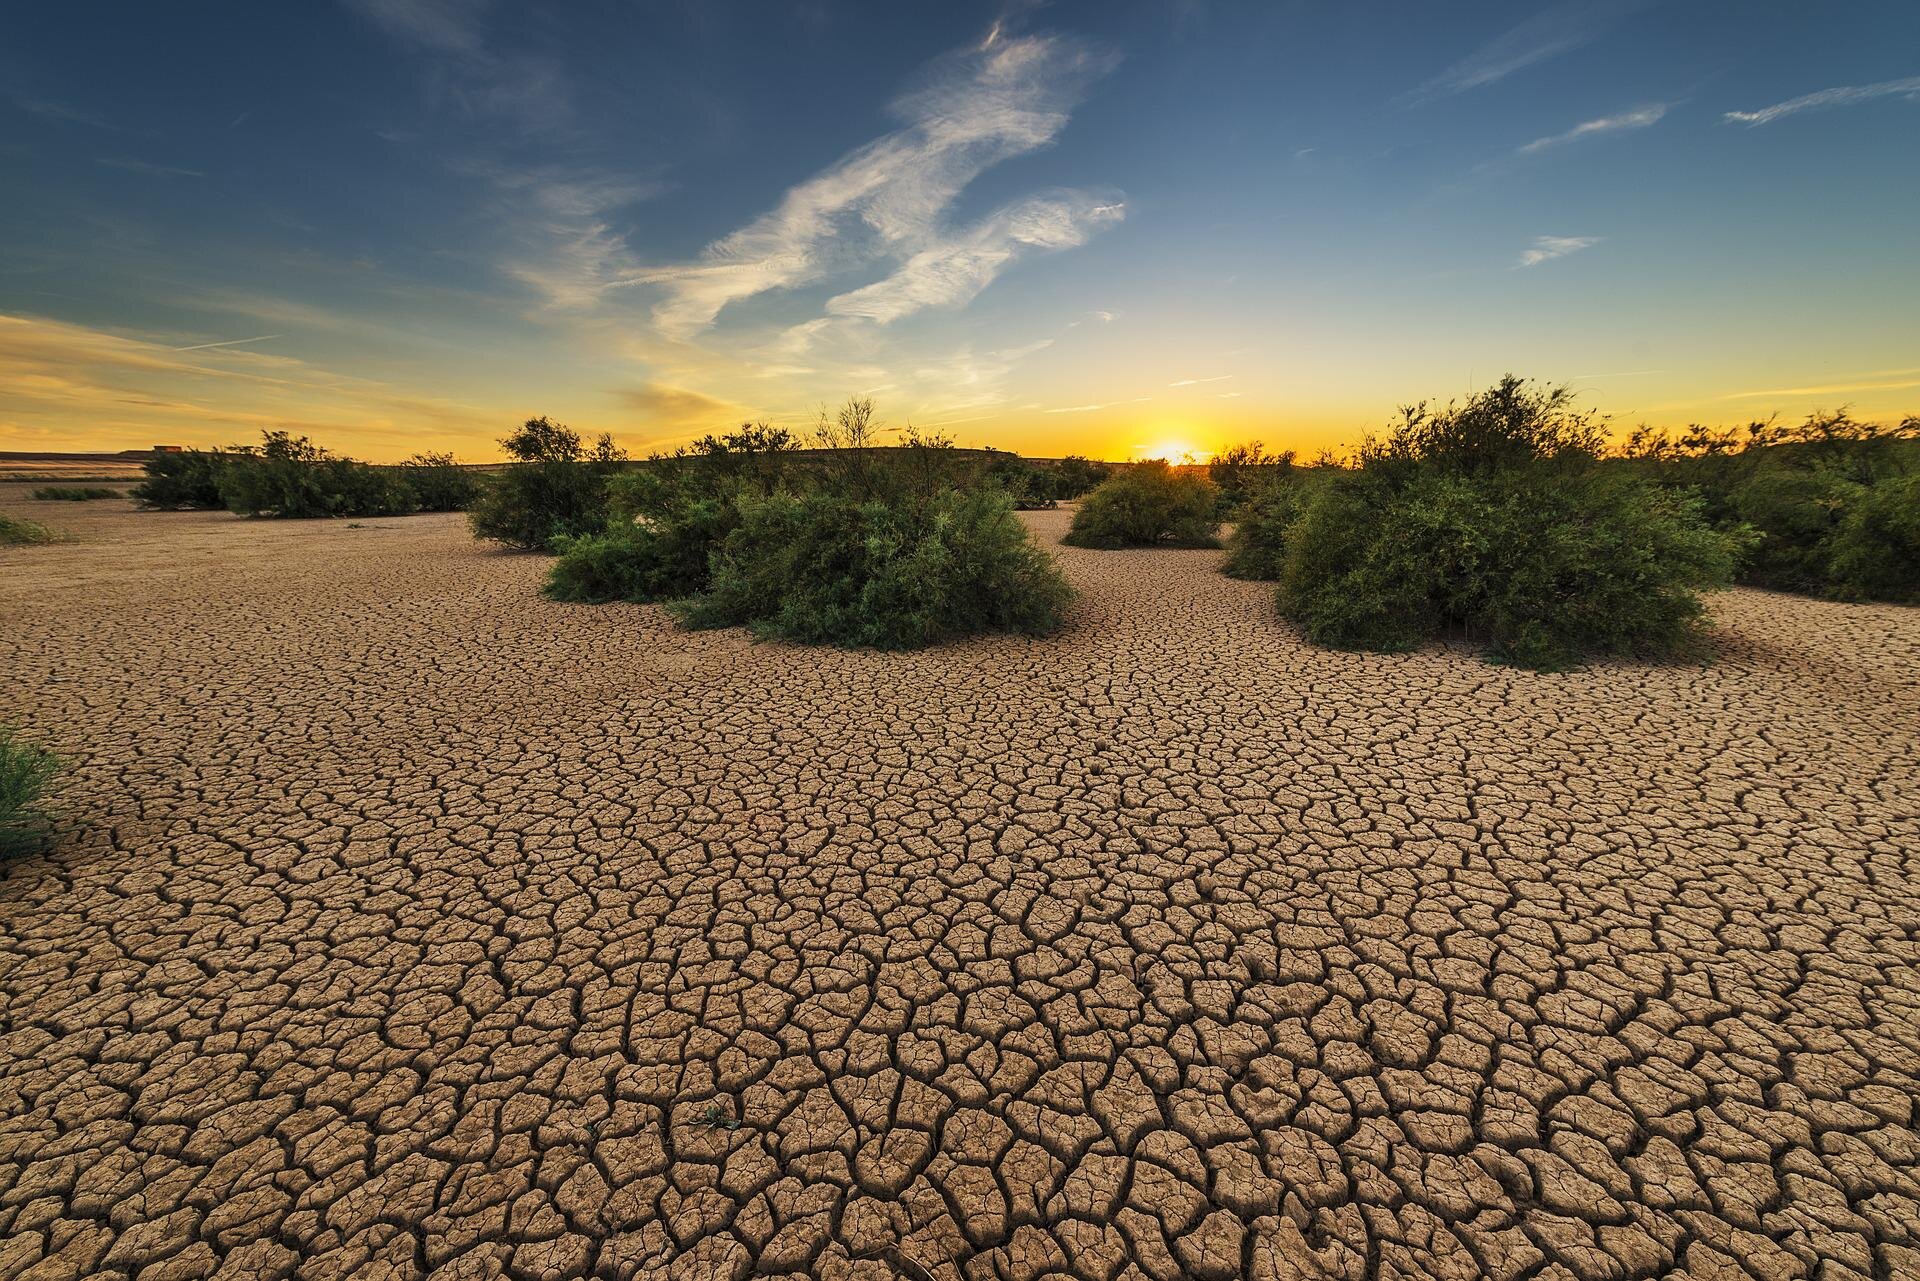 What is the root cause behind the severe drought in the Midwest?